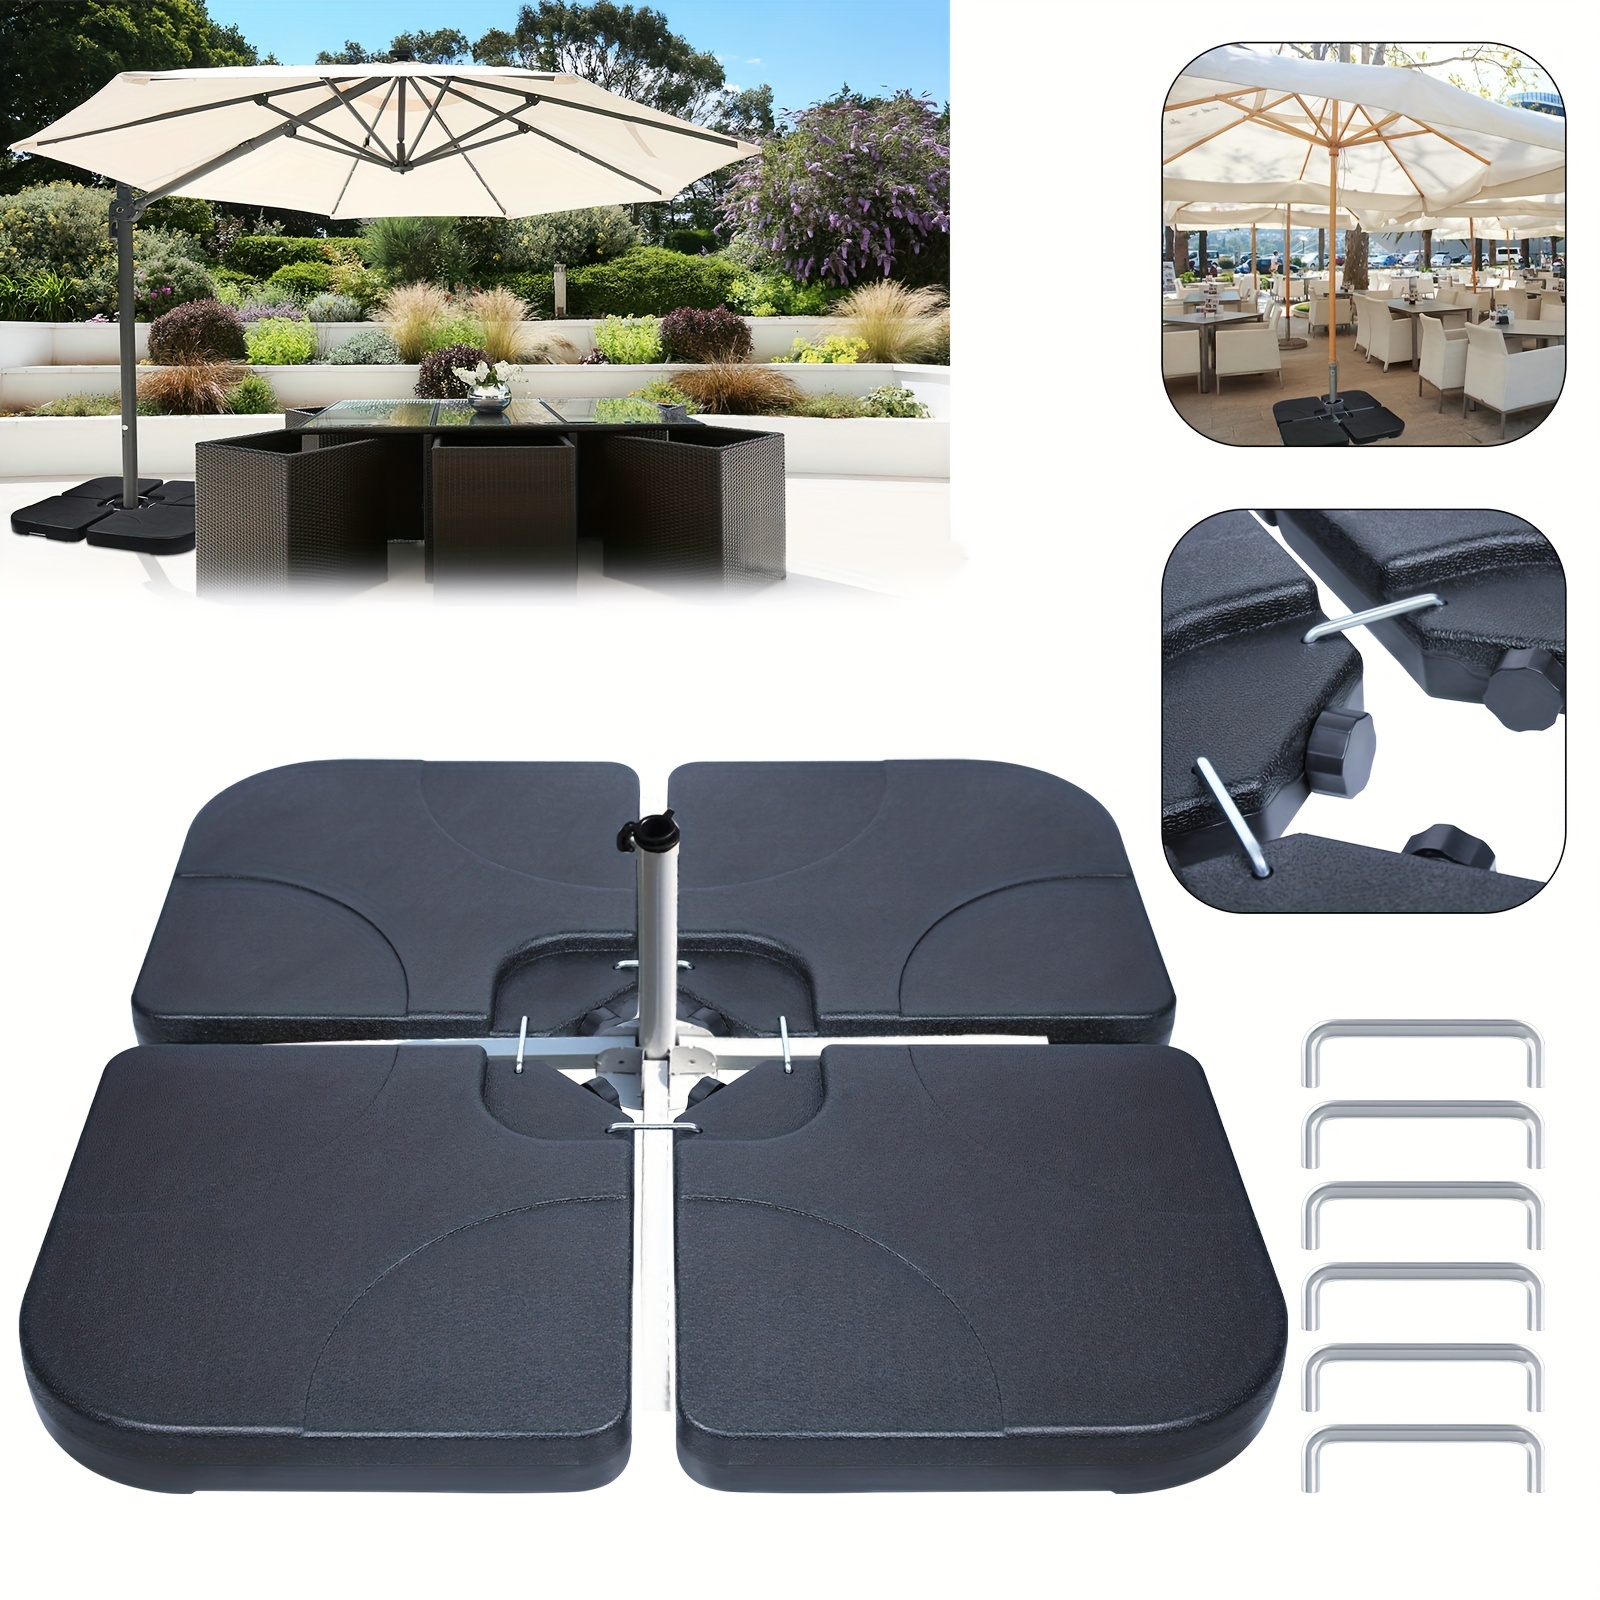 

Lars360 4 Pieces Parasol Stand 60 Litres/ 80 Kg Can Be Filled With Water Or Sand Umbrella Stand For Cantilever Parasol Base Cross Parasol Umbrella Weight Black